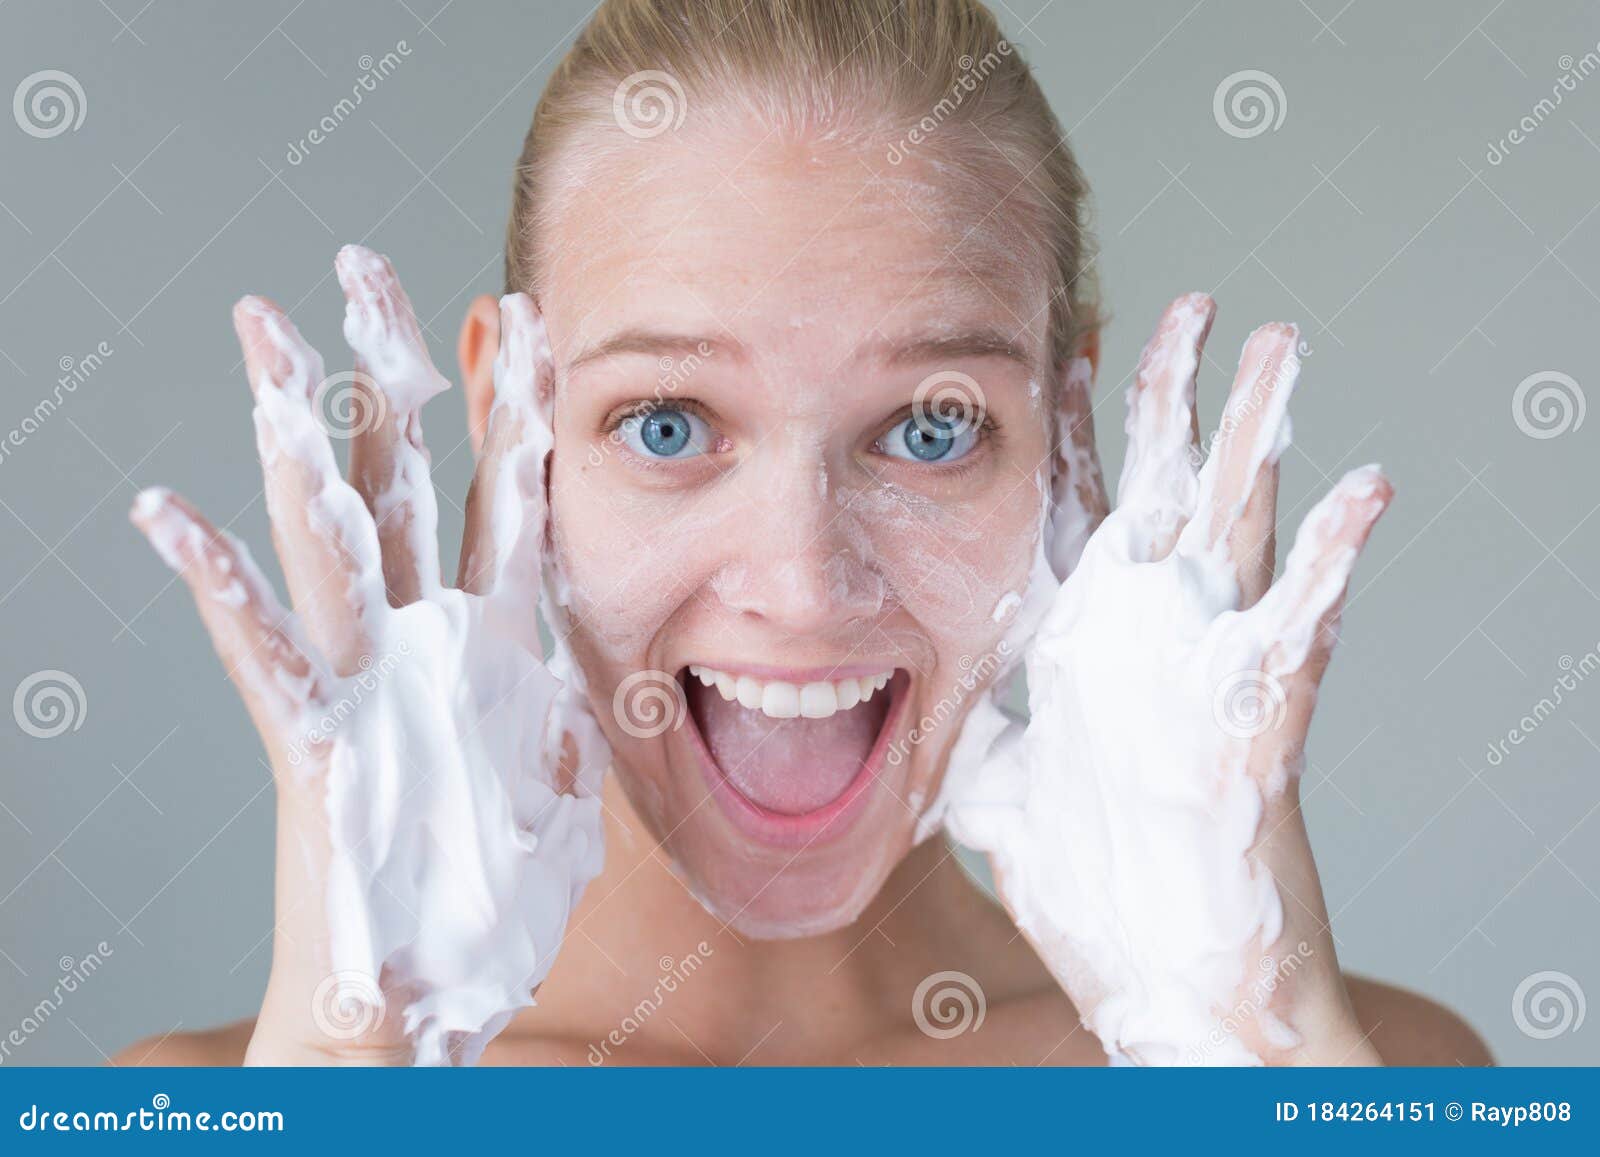 Beautiful Woman Washing Her Face With Water And Suds Smiling Hygiene And Beauty Skincare Stock 